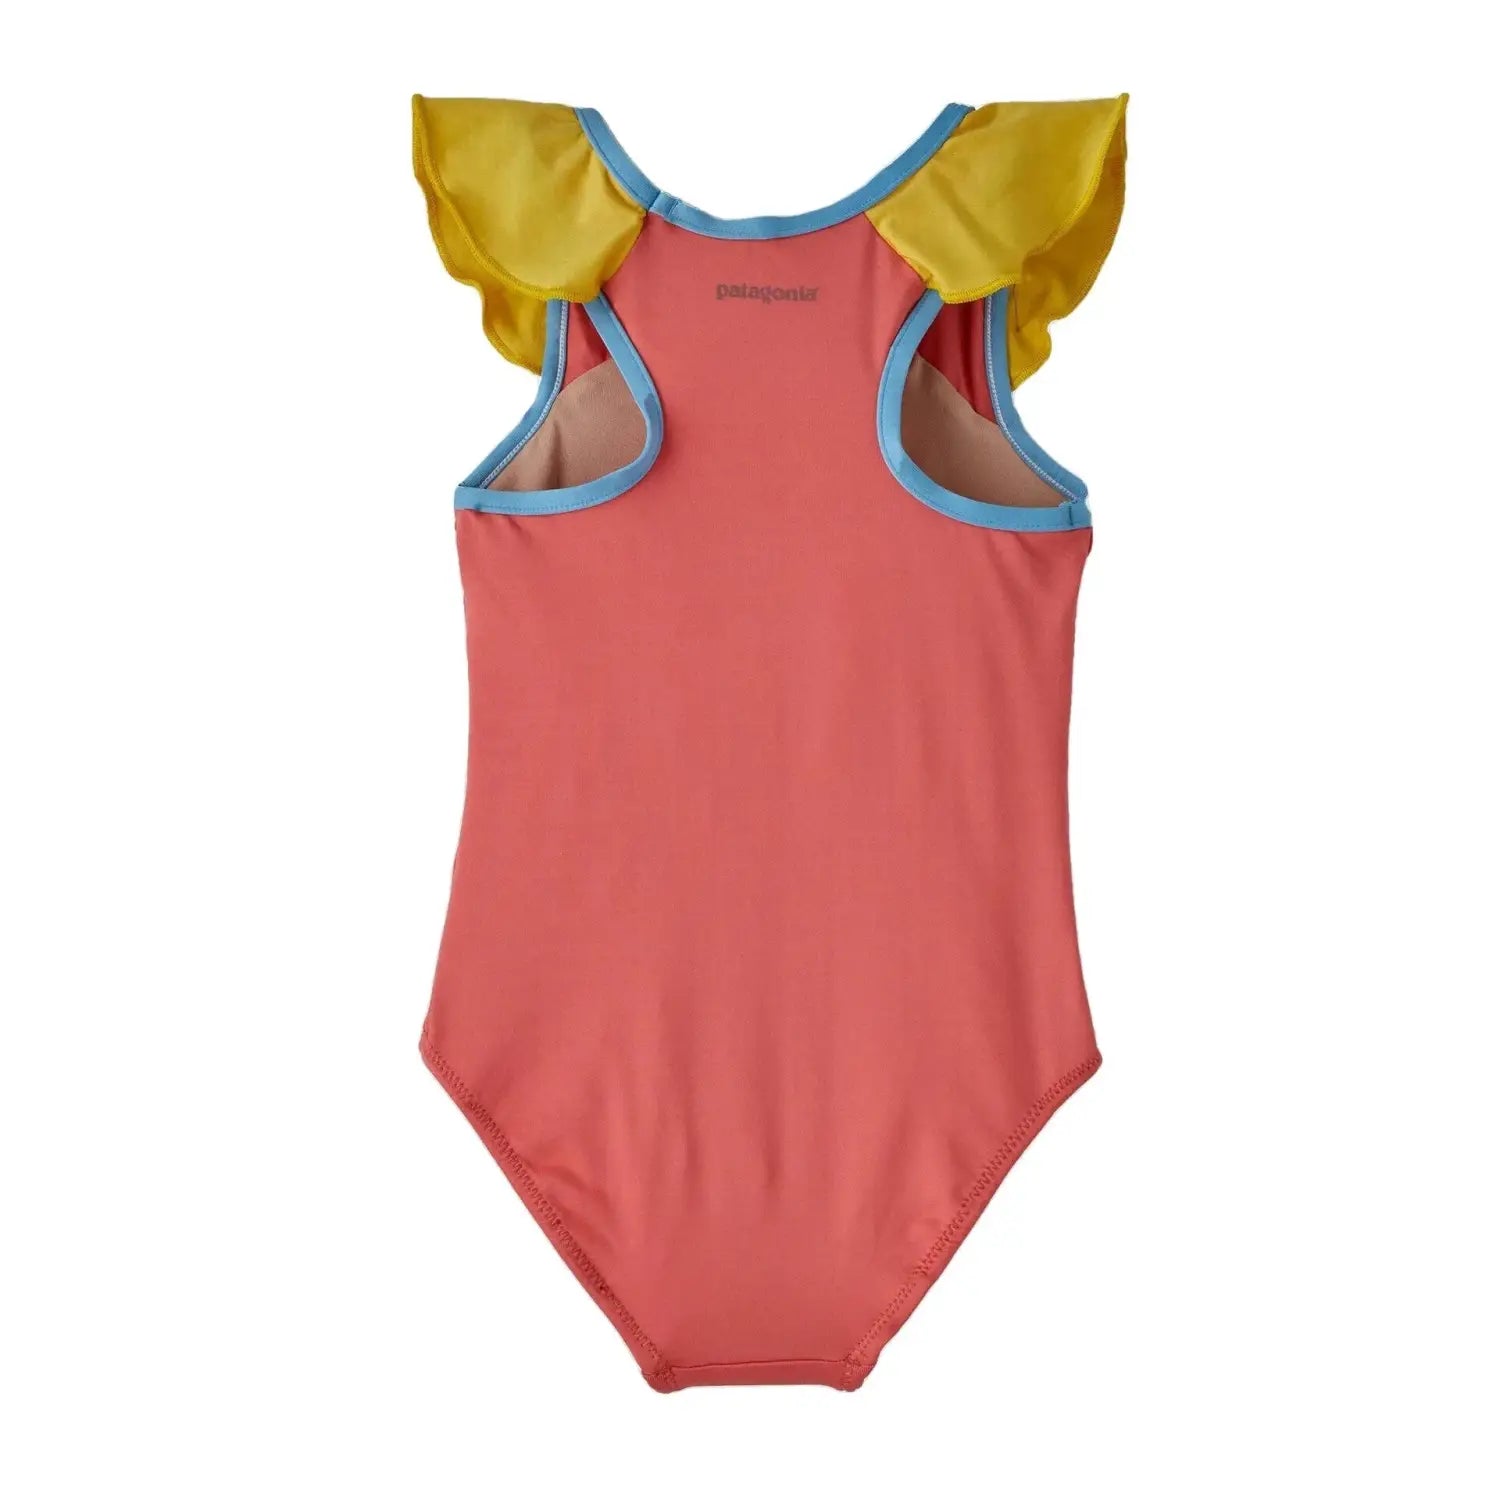 Patagonia Baby Water Sprout One-Piece Swimsuit, Coral, back view 